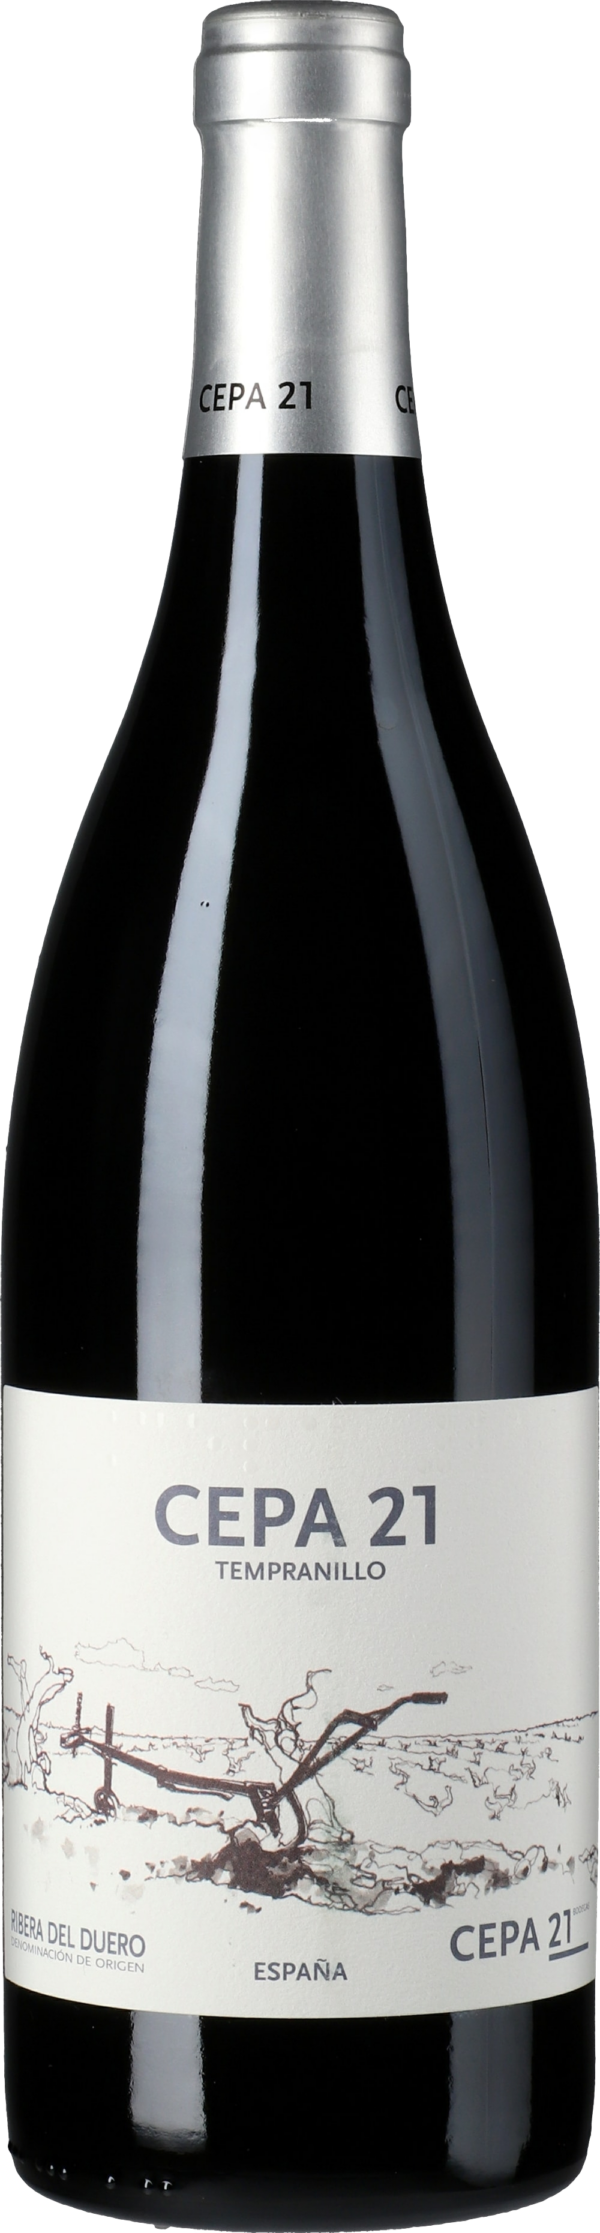 Product image of Emilio Moro Cepa 21 2020 from 8wines